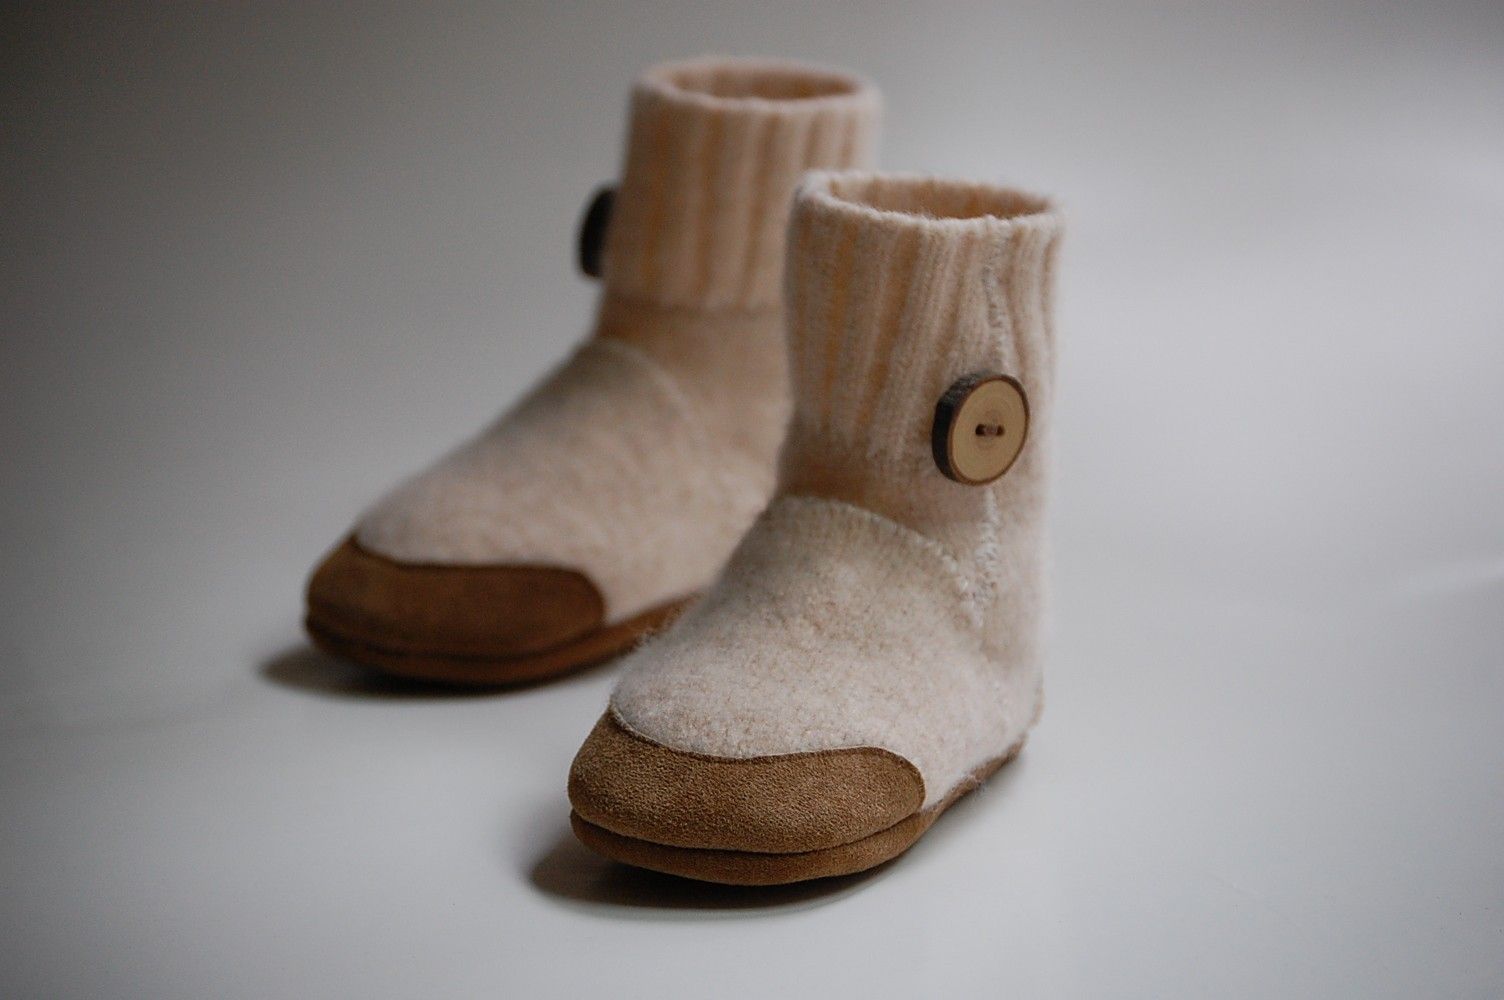 Recycled lambswool baby boots from Wooly Baby